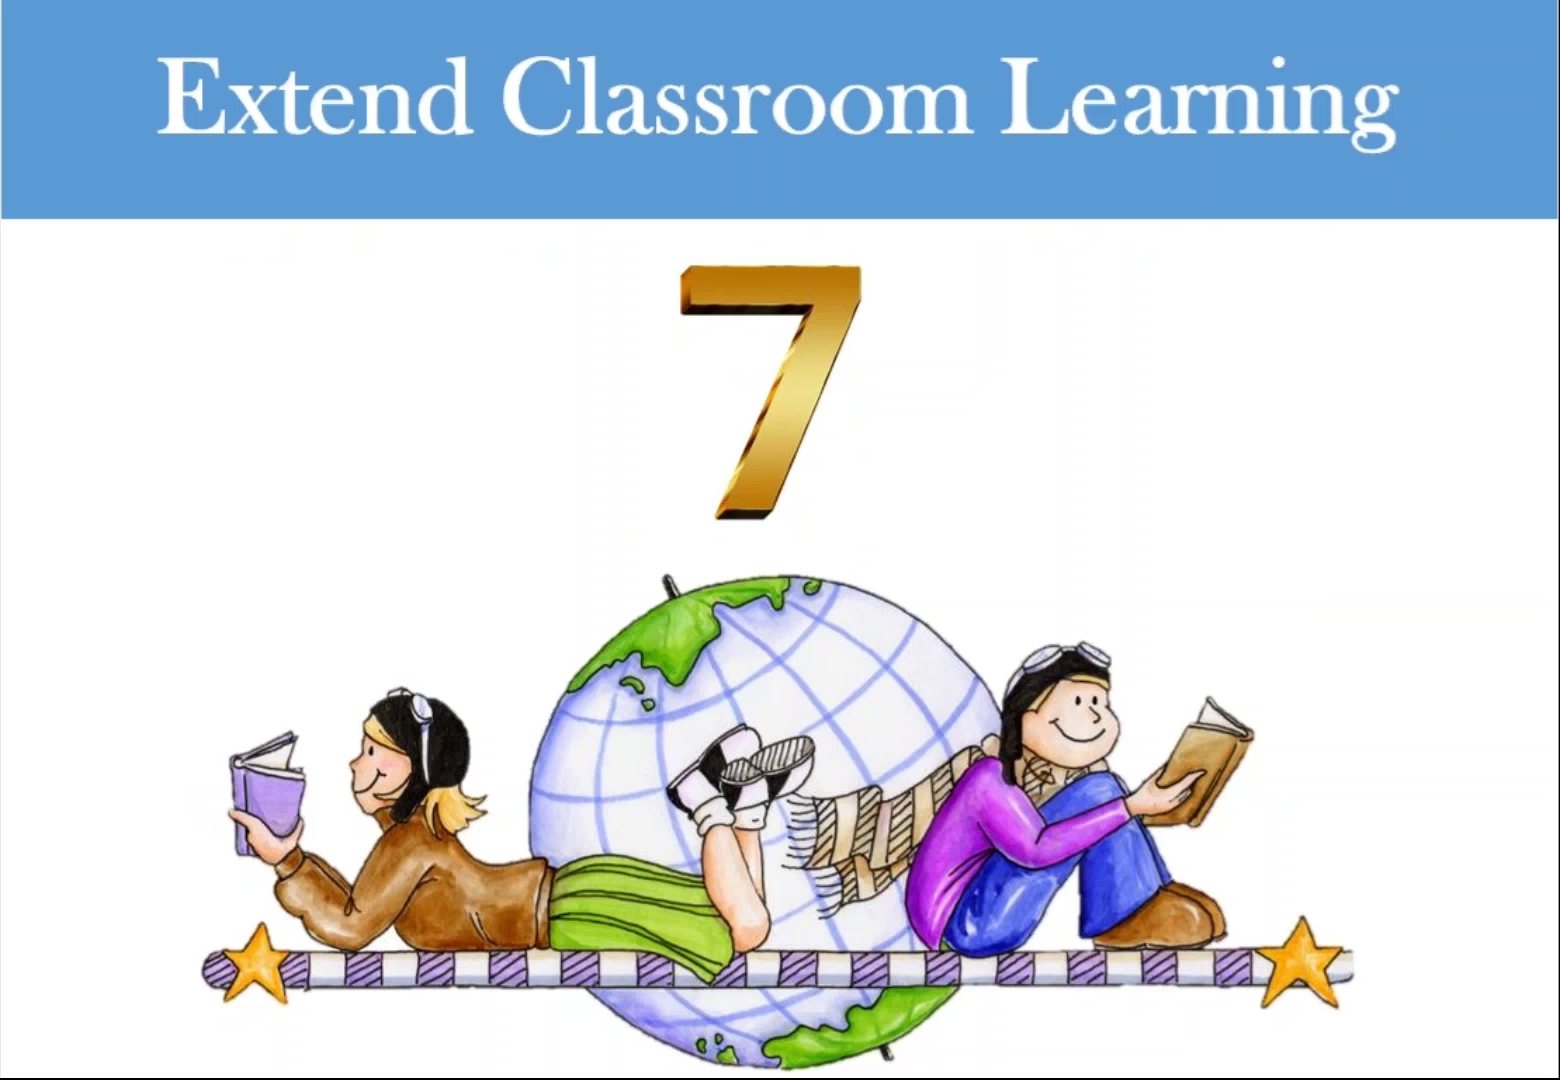 Extending Classroom Learning